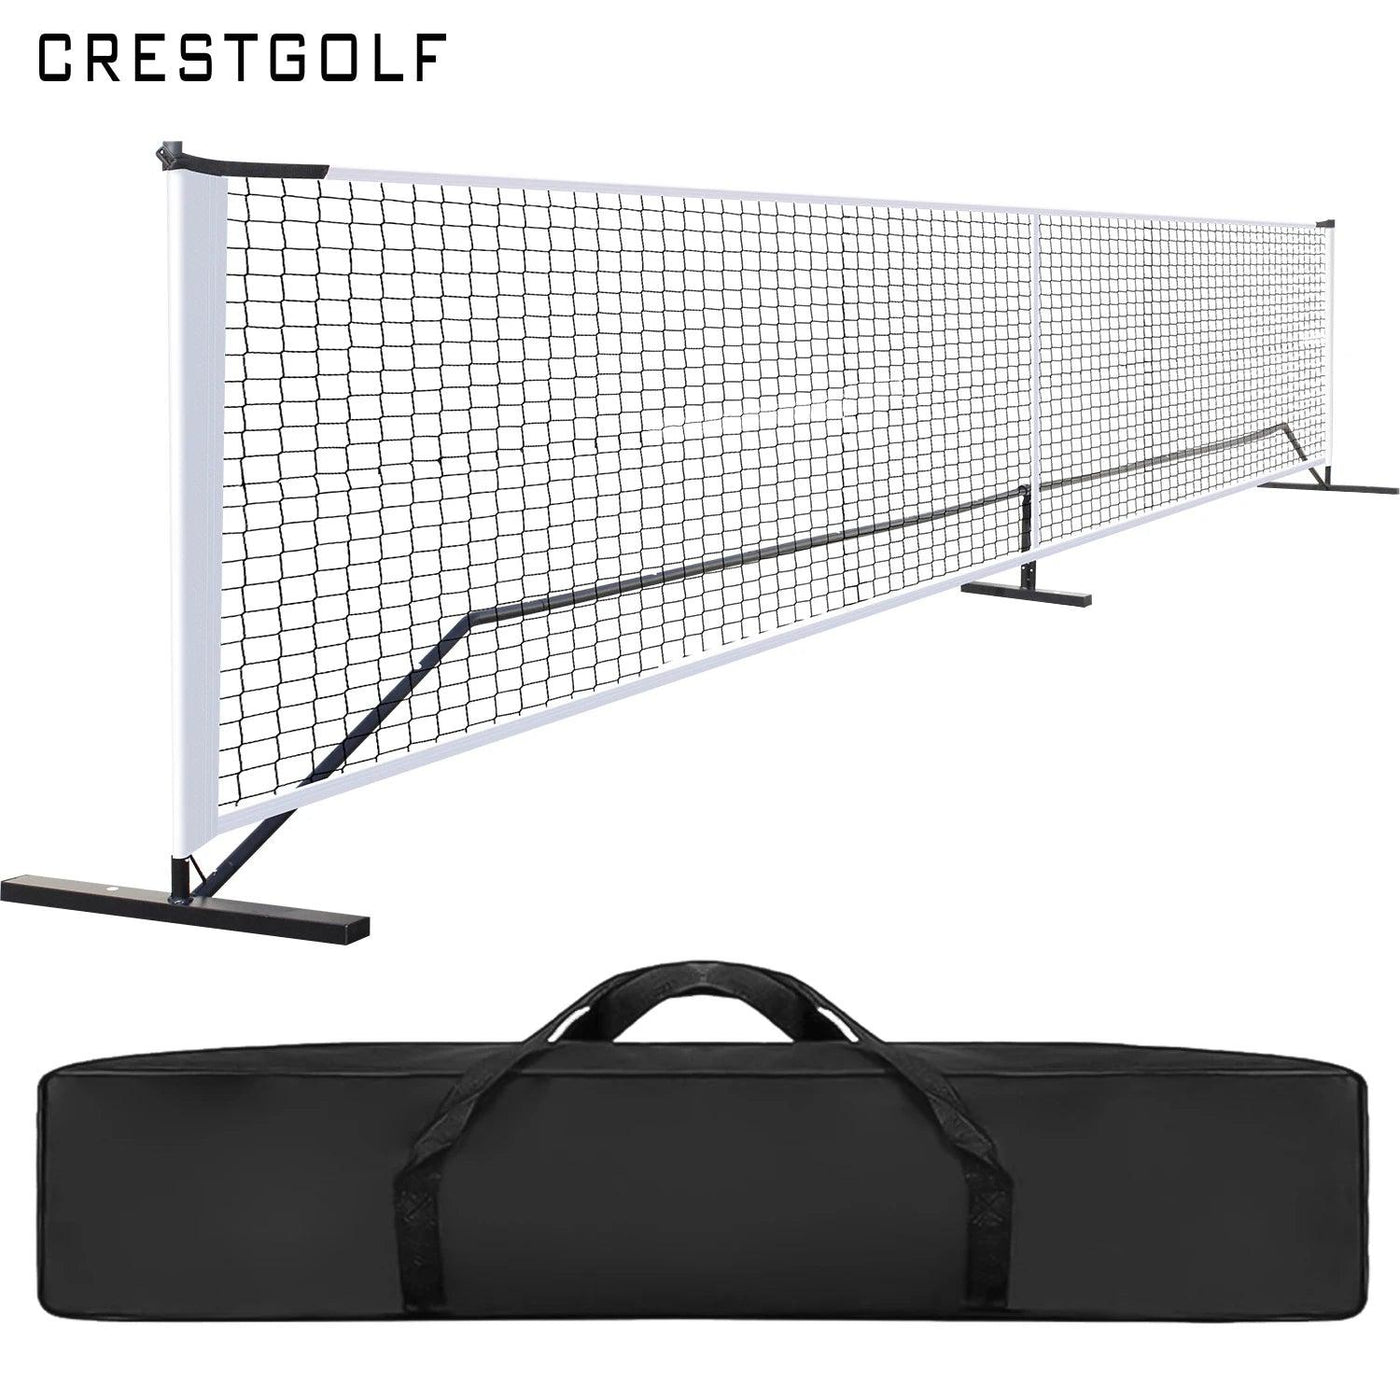 Durable indoor pickleball net for consistent play